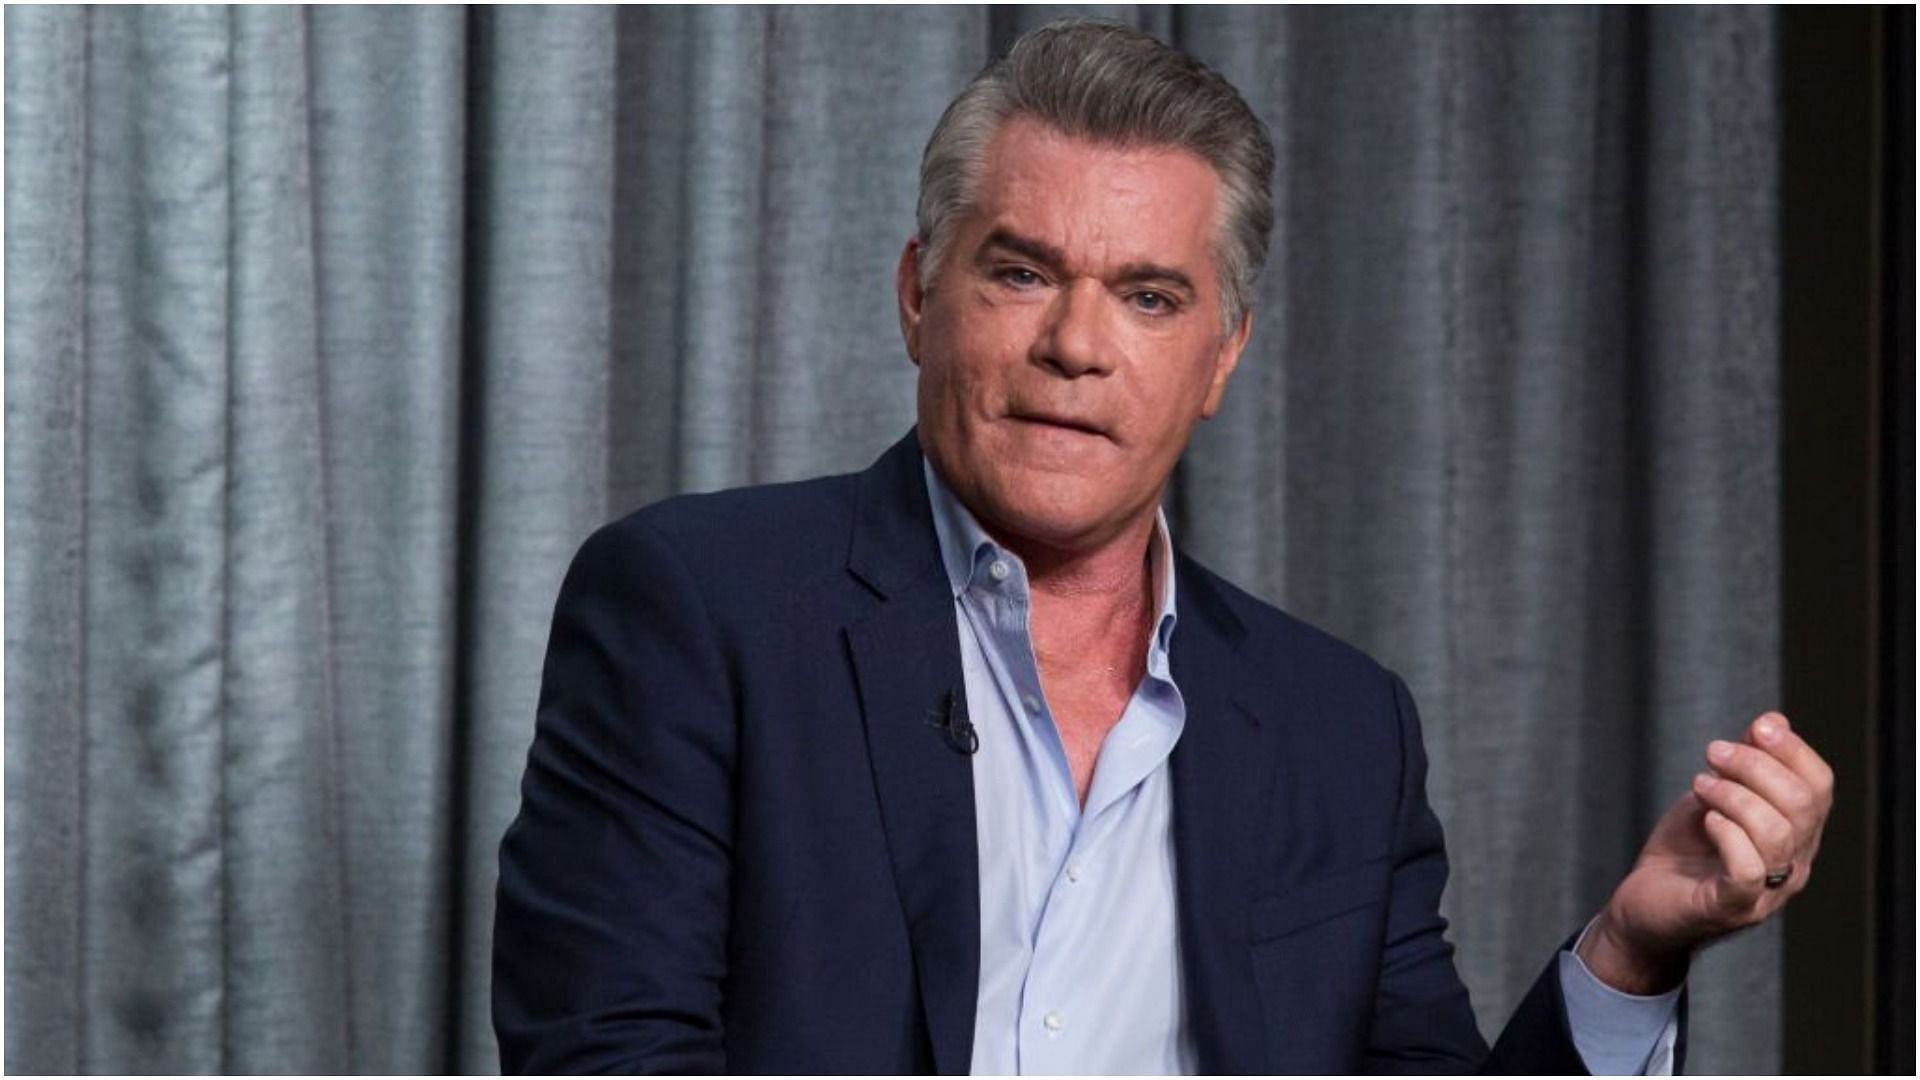 Ray Liotta recently died at the age of 67 (Image via Vincent Sandoval/Getty Images)